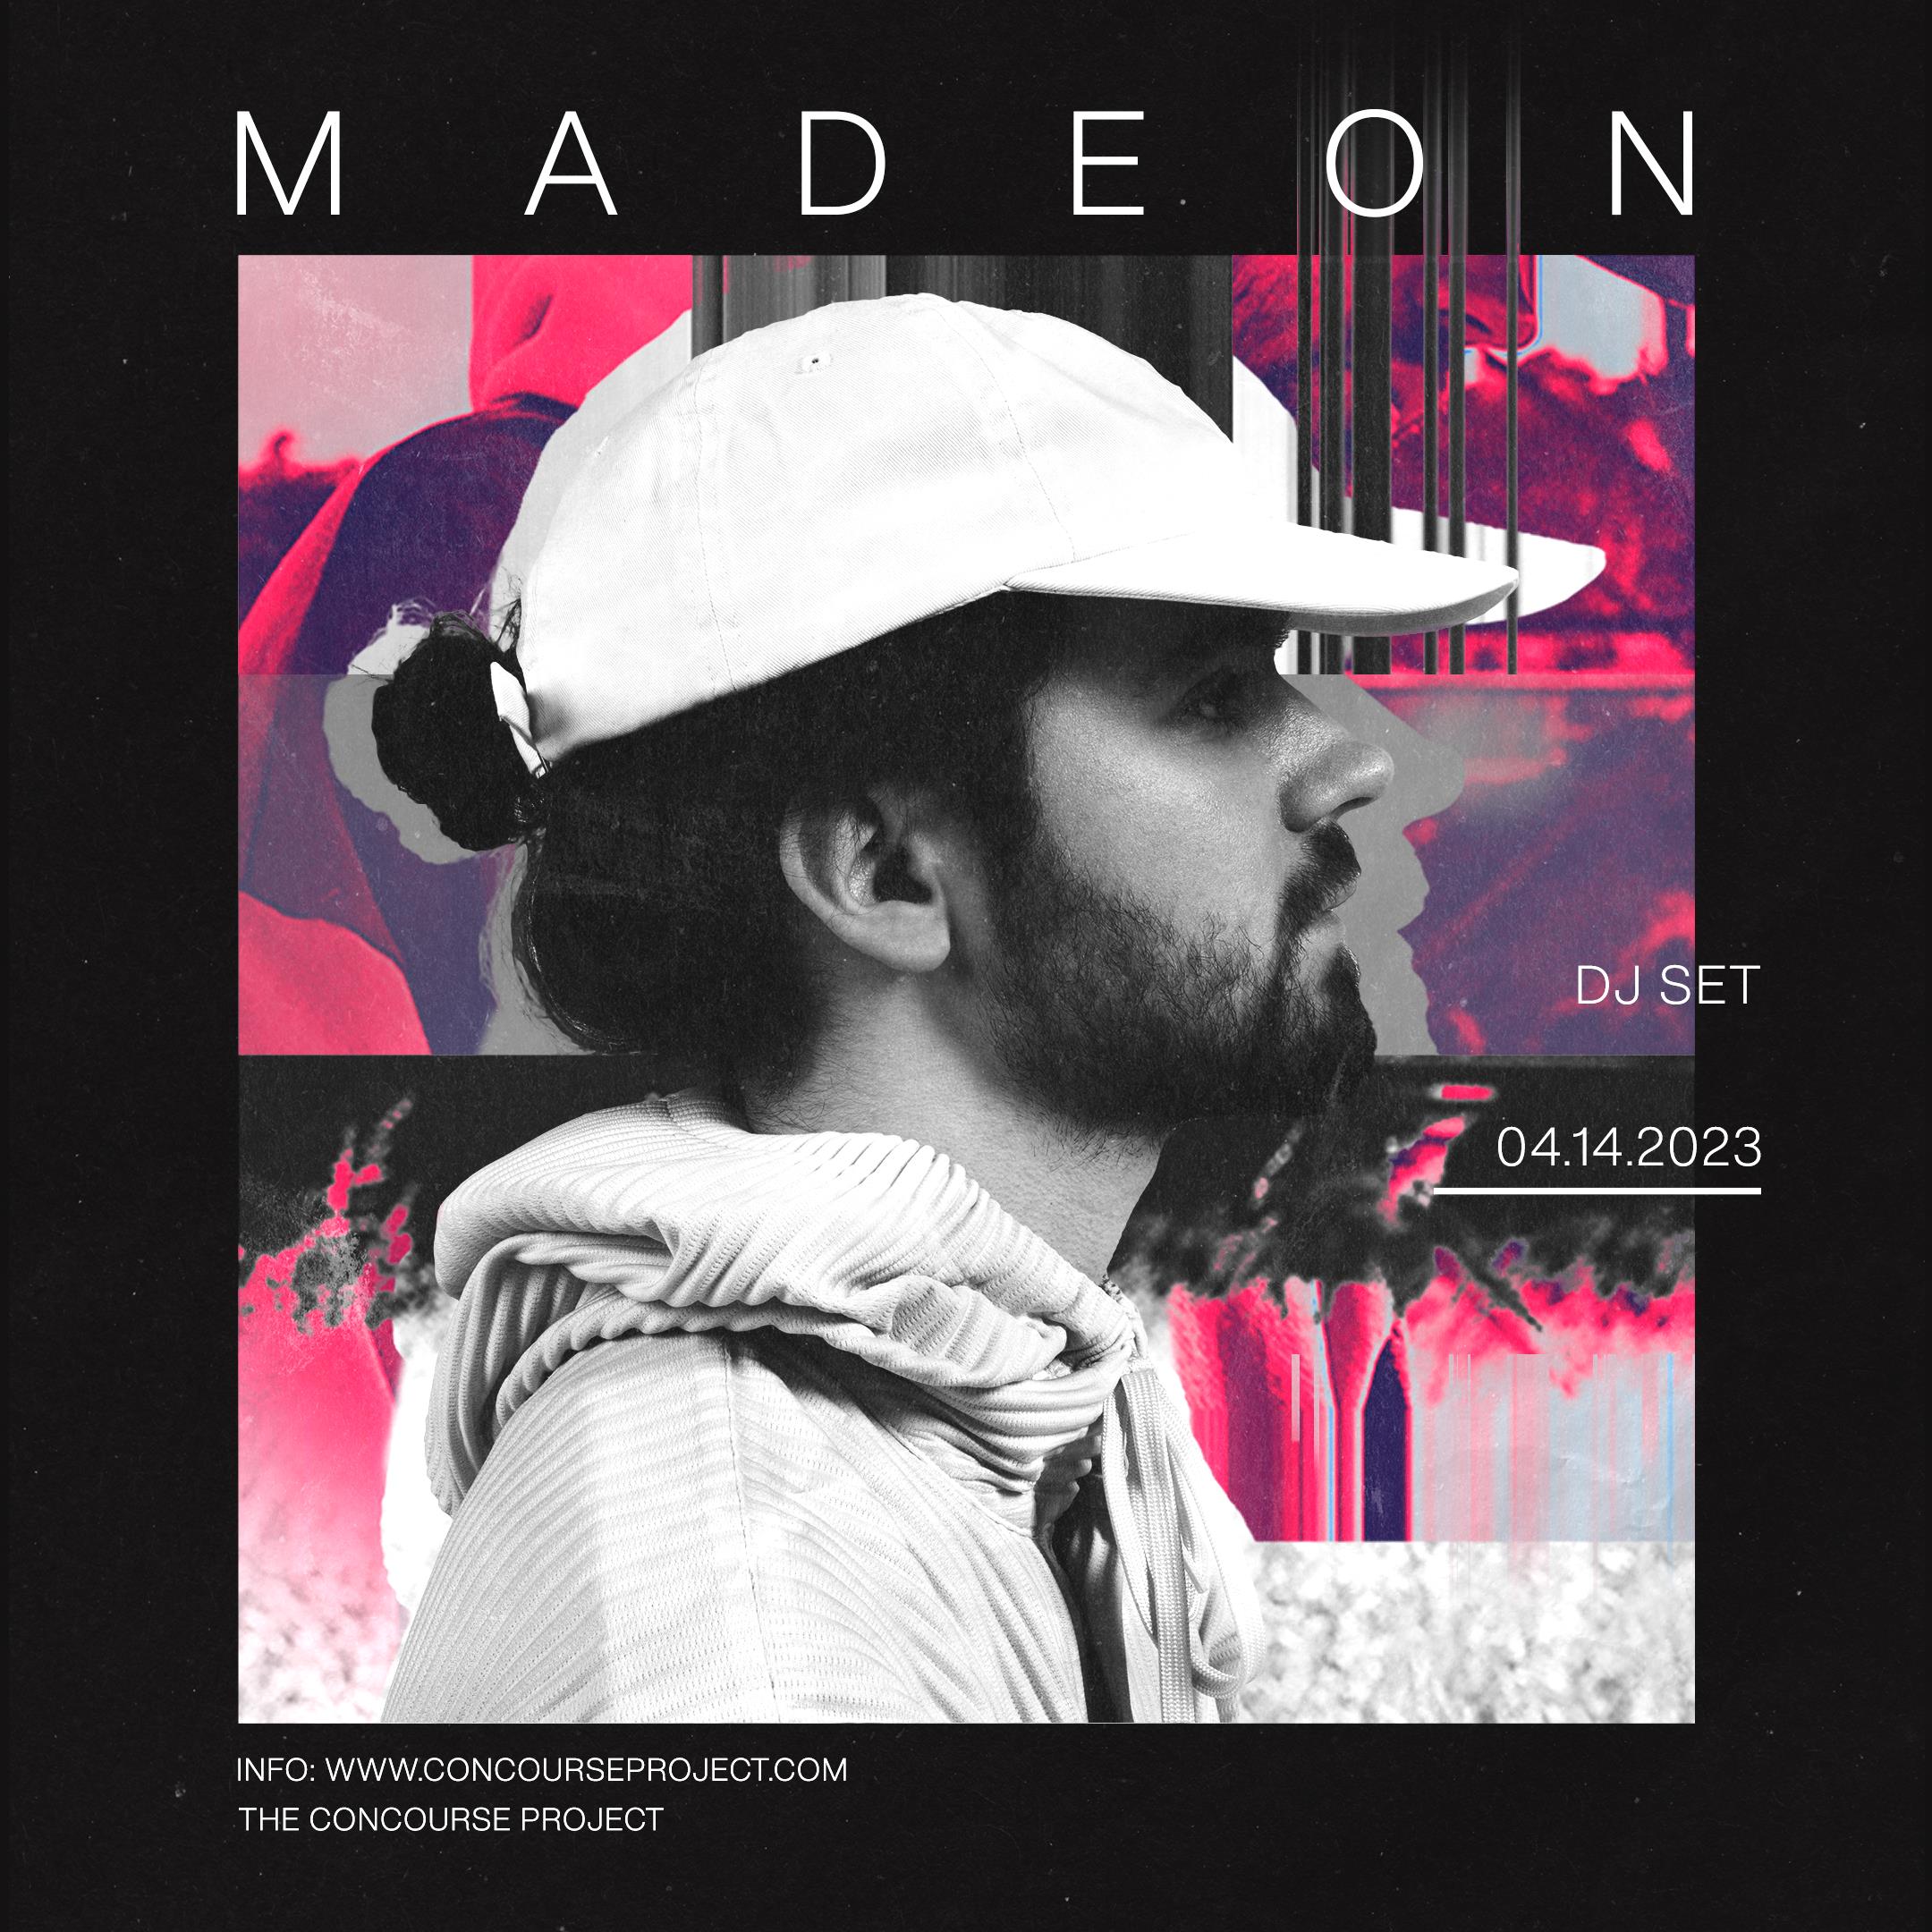 Madeon (DJ Set) at The Concourse Project